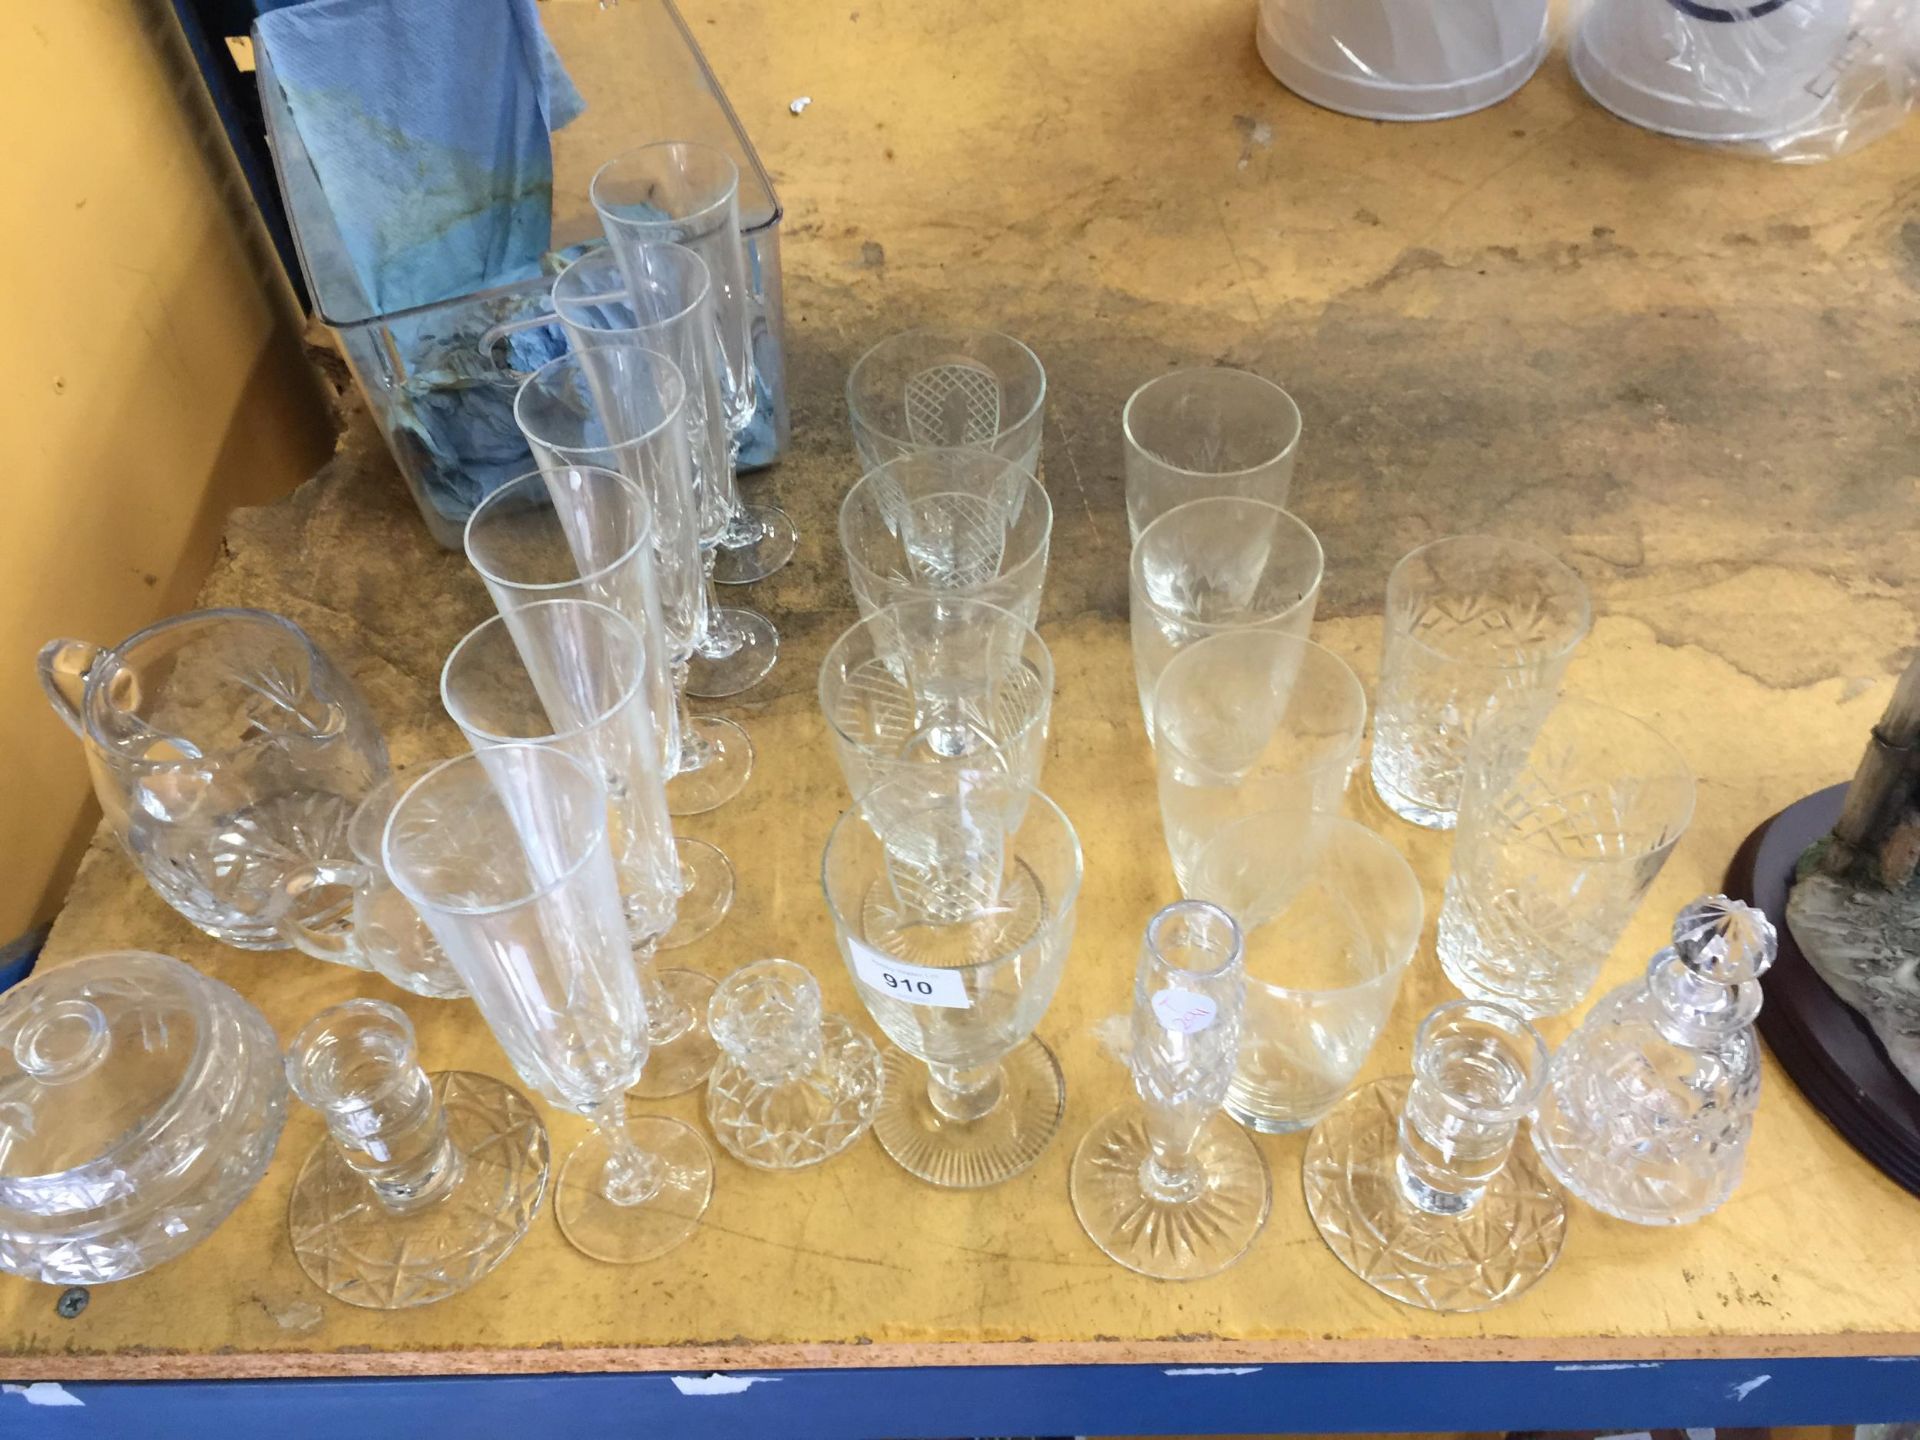 A QUANTITY OF GLASSES TO INCLUDE CHAMPAGNE FLUTES, WINE, TUMBLERS, ETC, PLUS CANDLESTICKS, JUGS, - Image 4 of 4